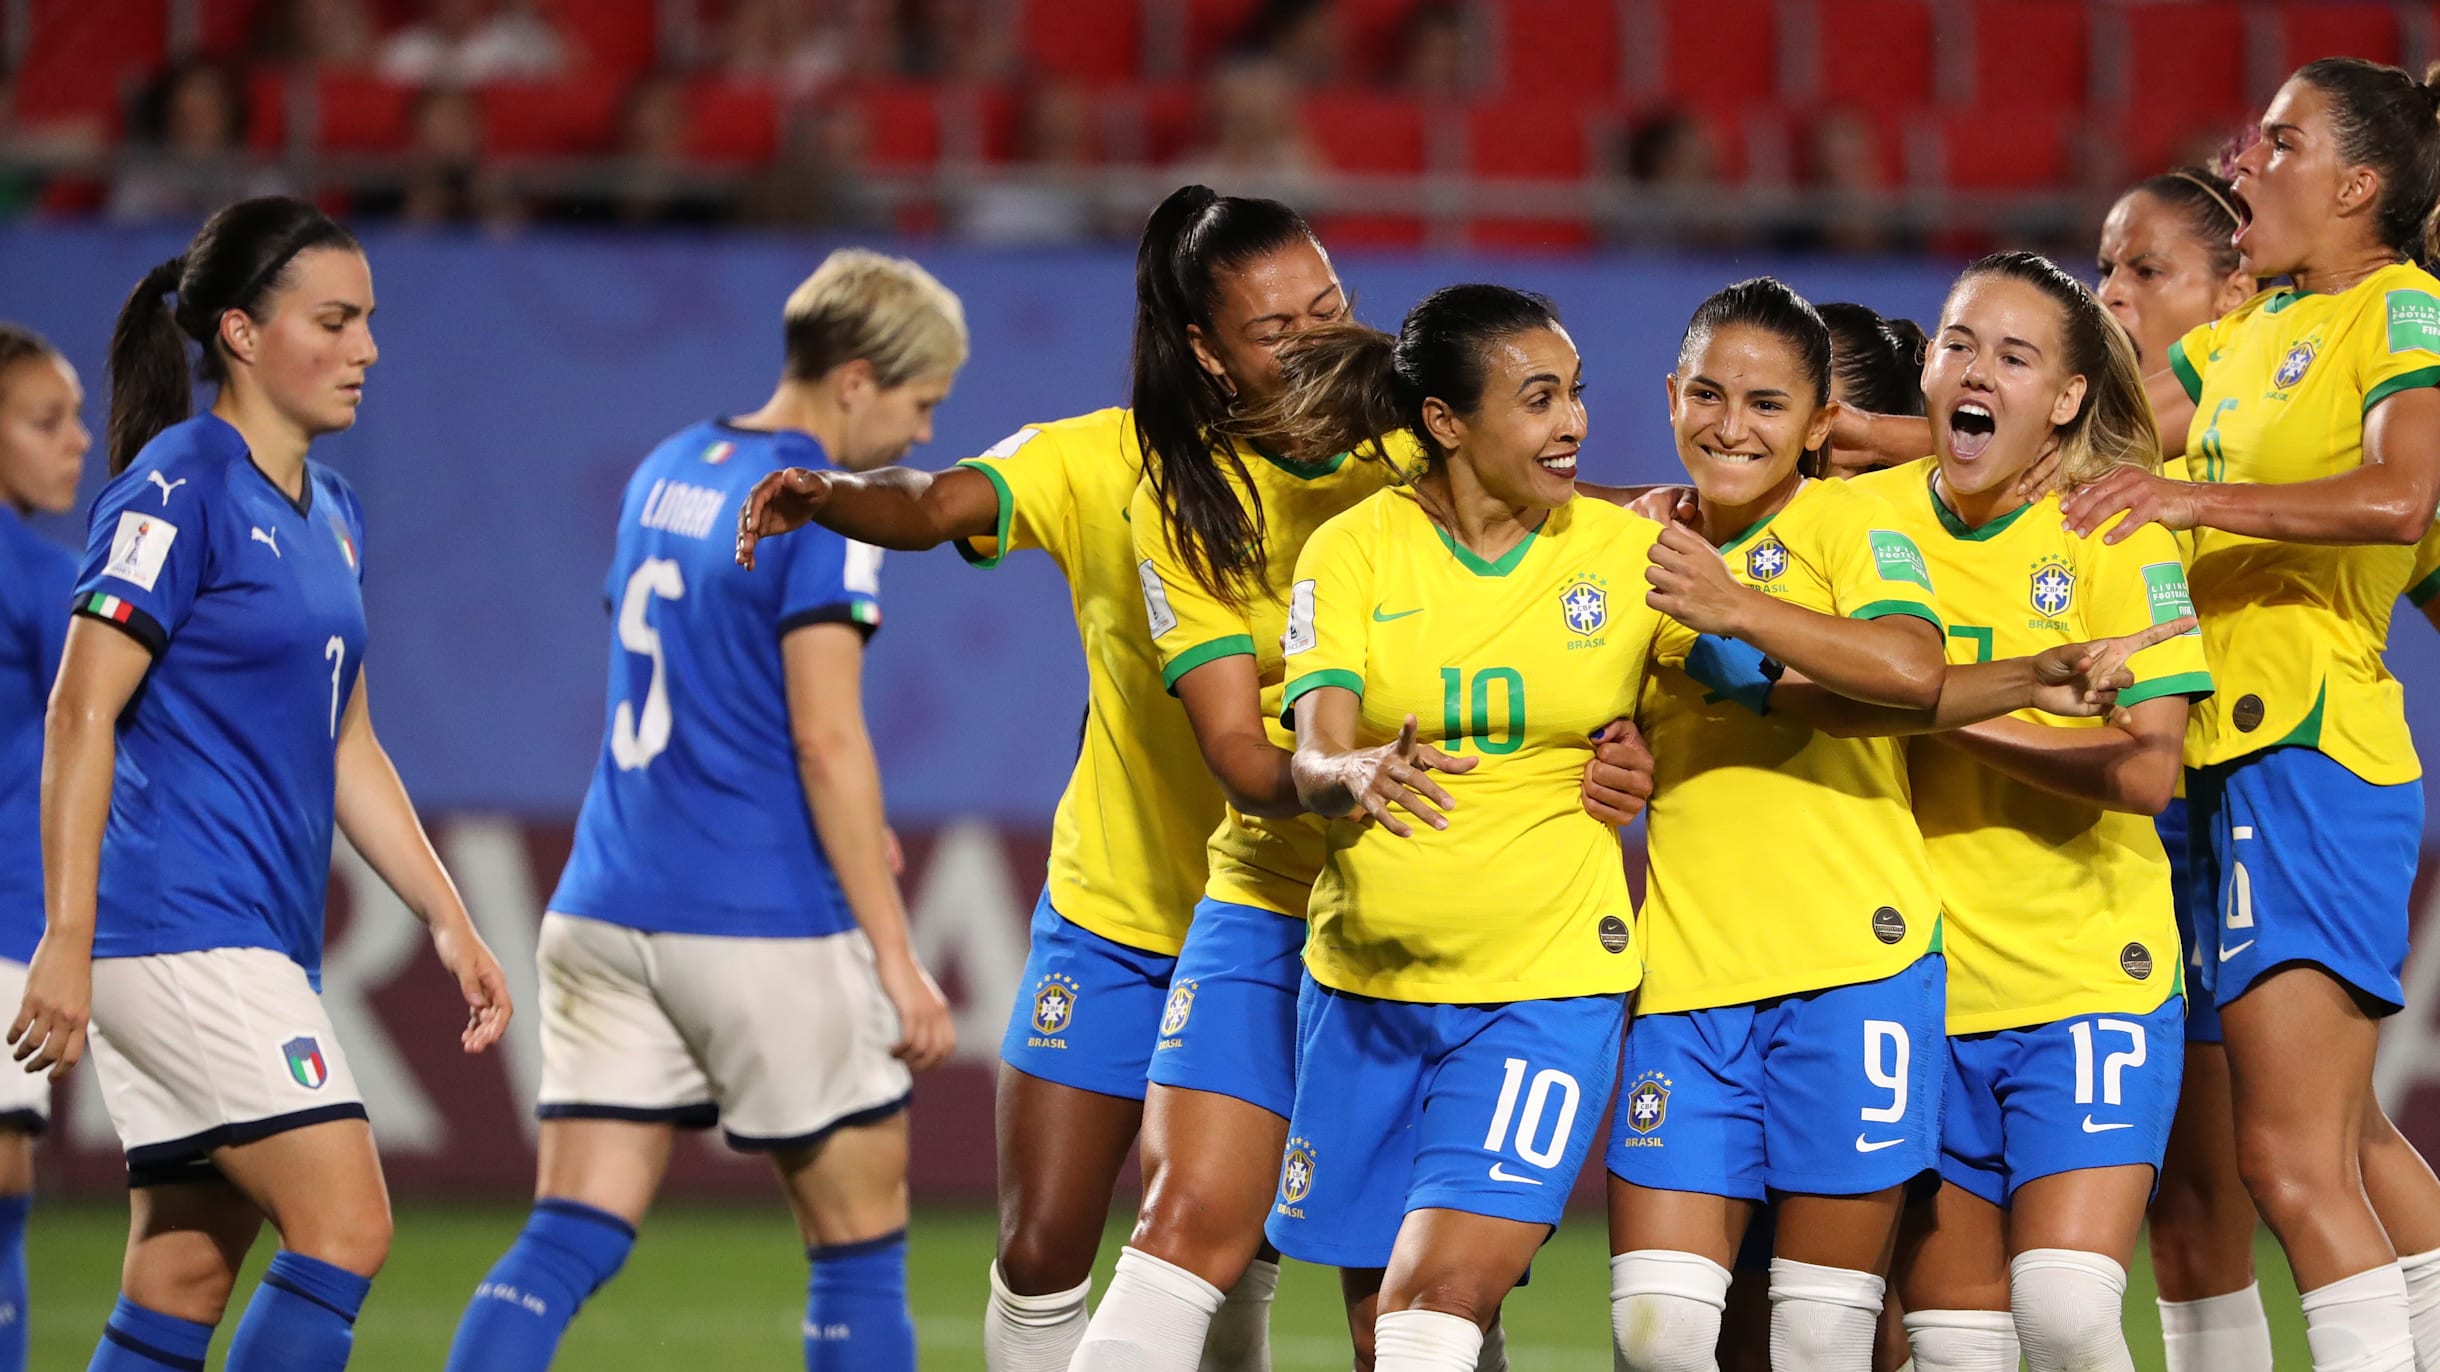 Brazilian National Football Team Drops to 3rd Place in FIFA